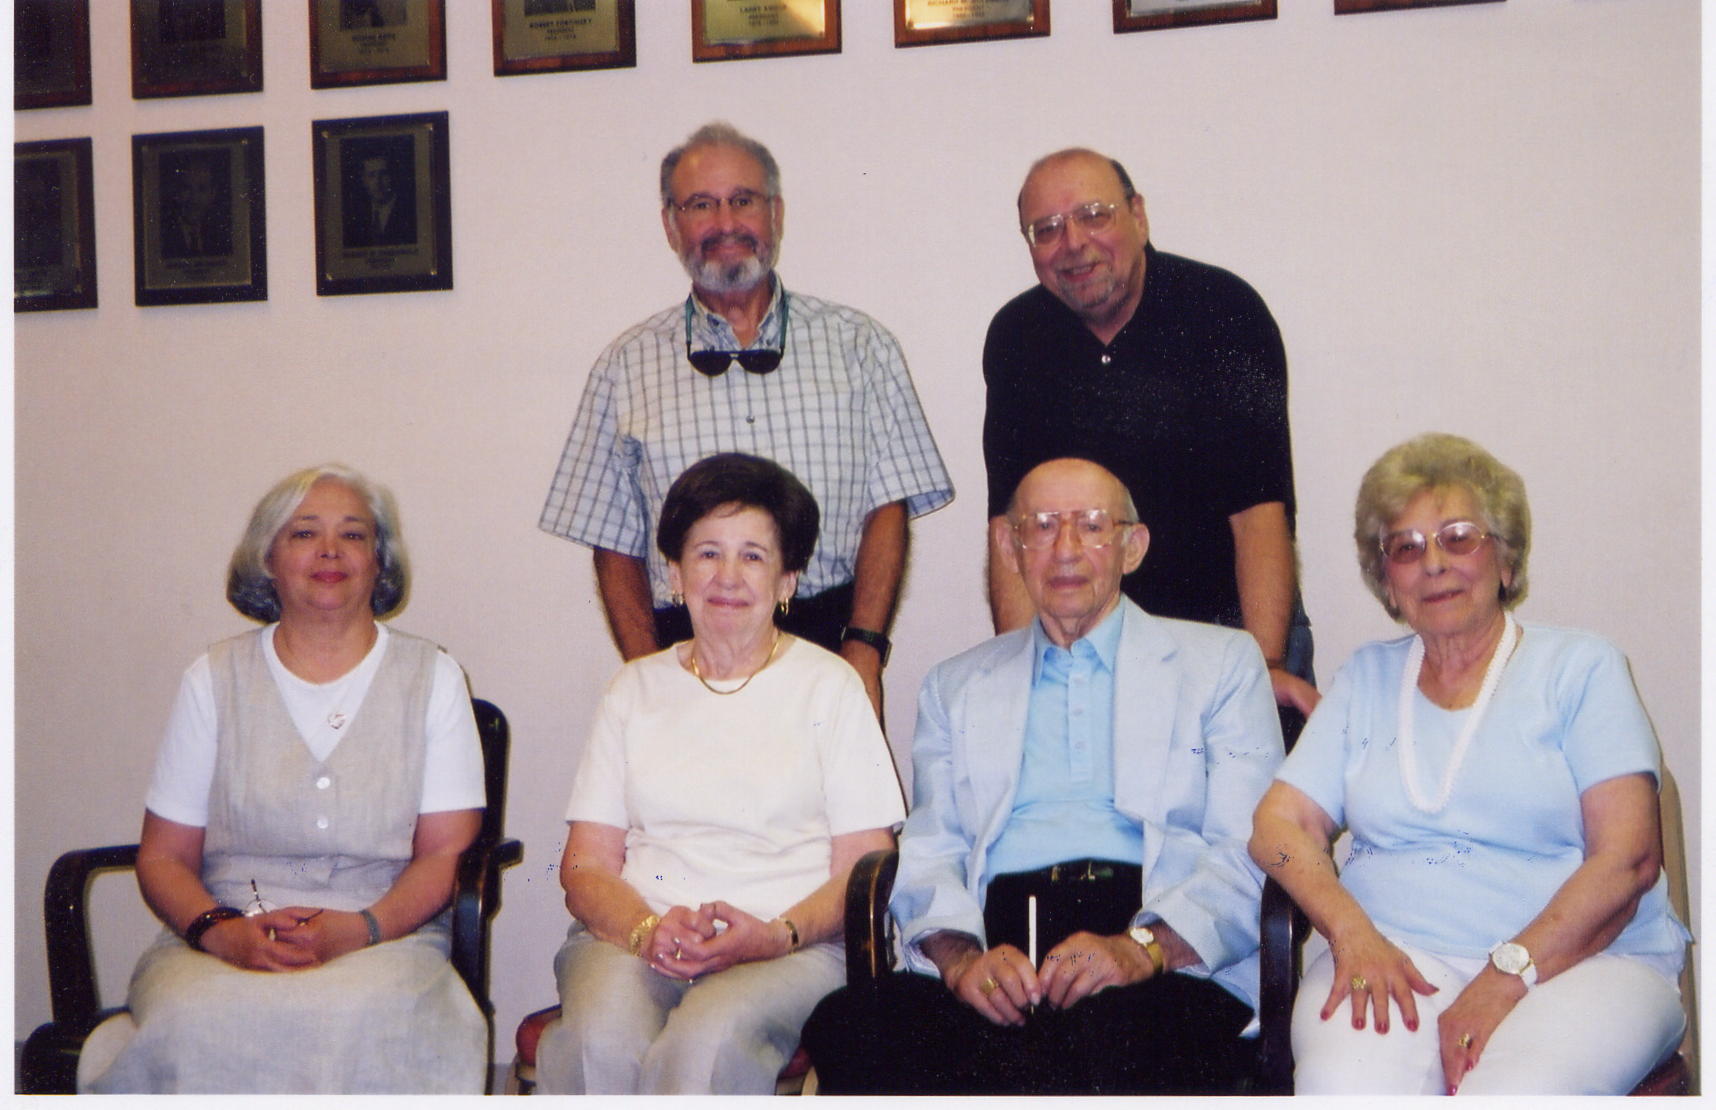 STANDING: AL GELB AND ELLIS KATZ. SEATED: JANET MOSKOWITZ, ANN COHEN, PAUL GELB [AT AGE 97], ESSIE ULLMAN. PICTURE FROM 2001.